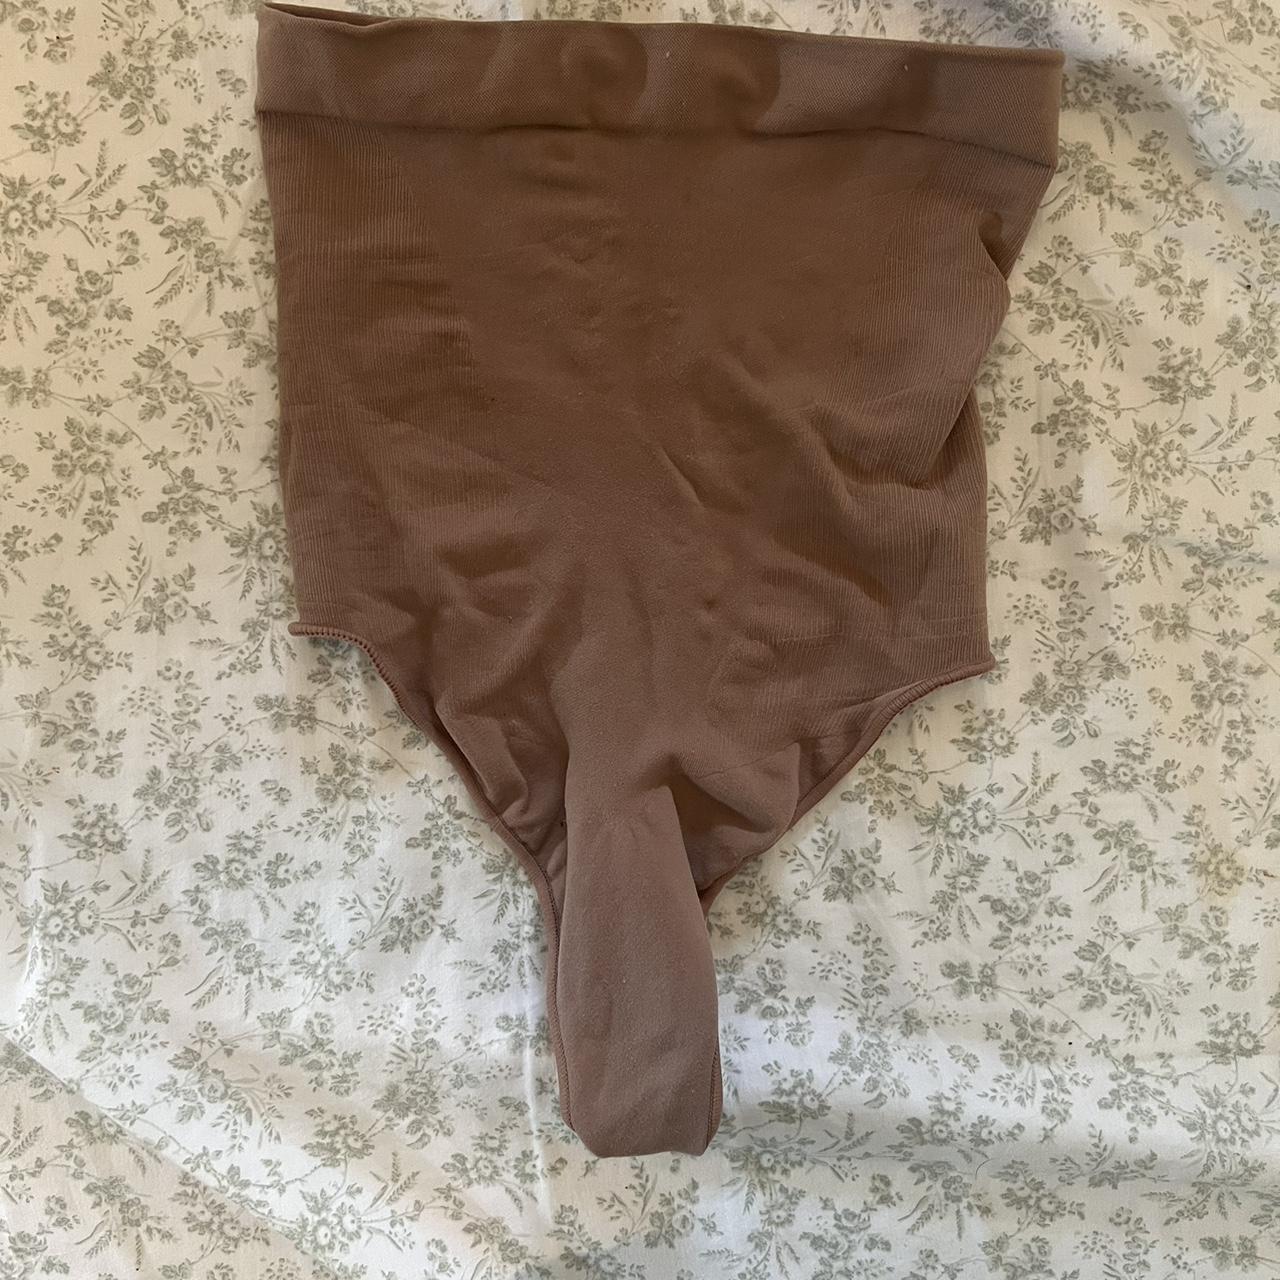 NEW BROWN SIZE SMALL THONG HIGH WAISTED SHAPEWEAR - Depop